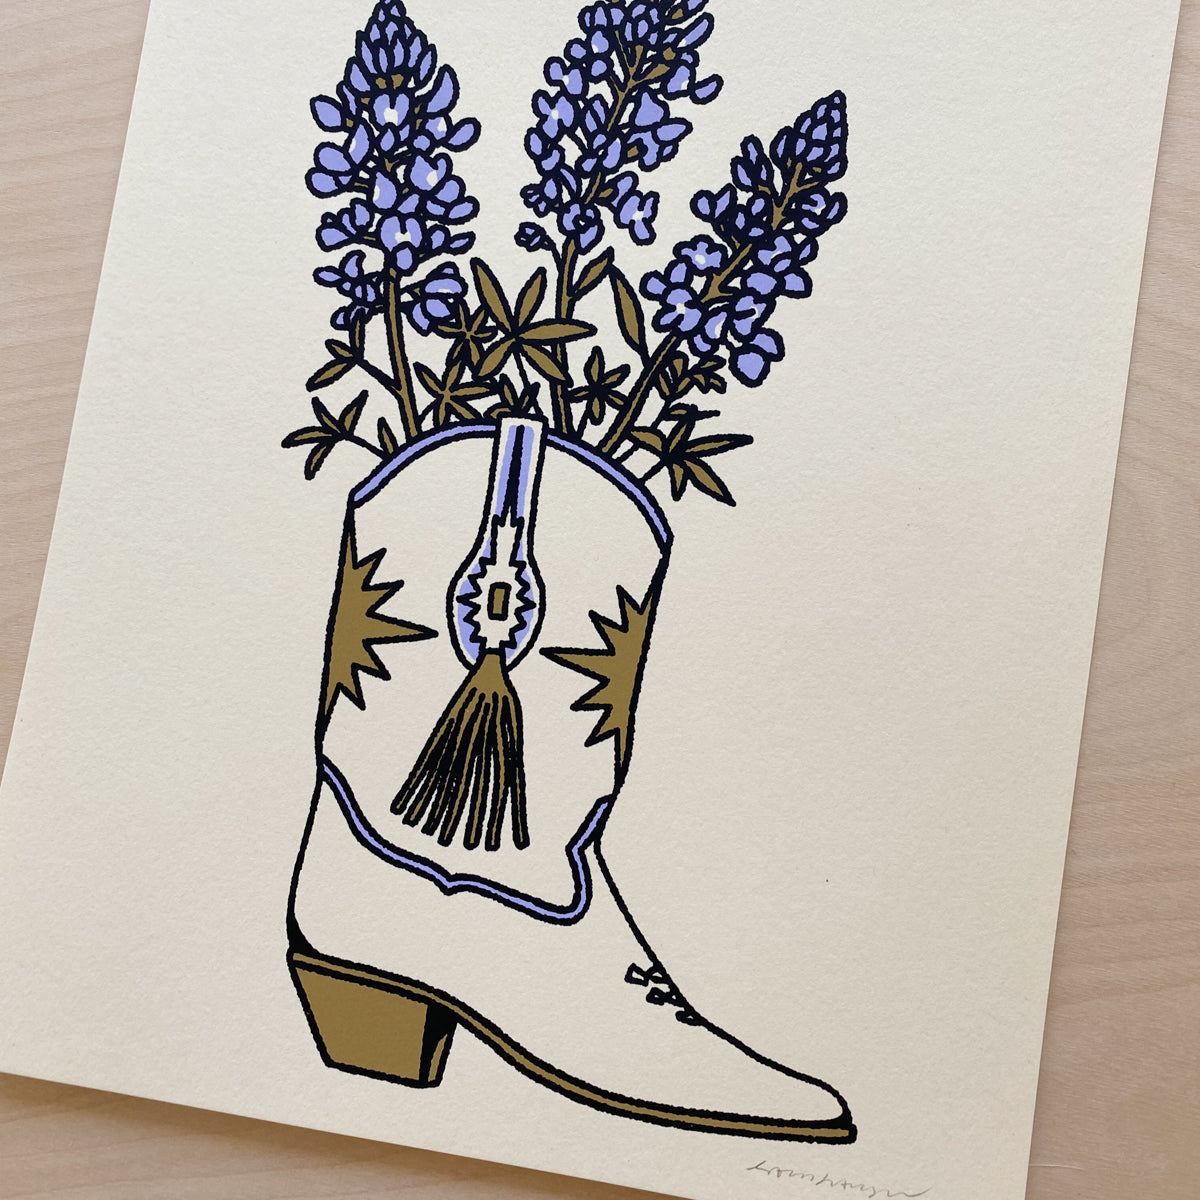 Bluebonnet Boot - Signed 8x10in Print #301